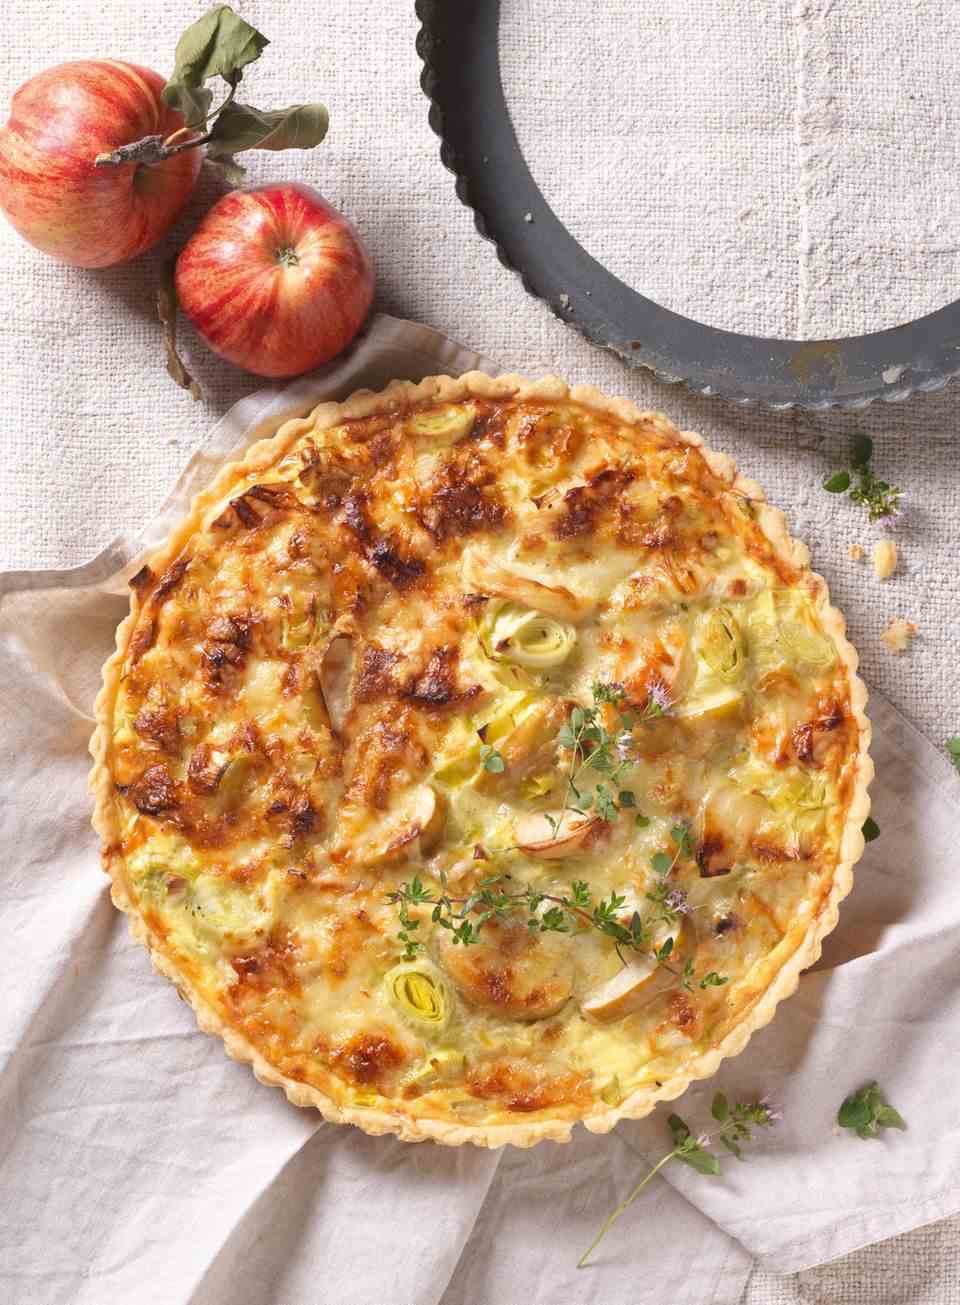 Apple orchard: Apple and leek quiche